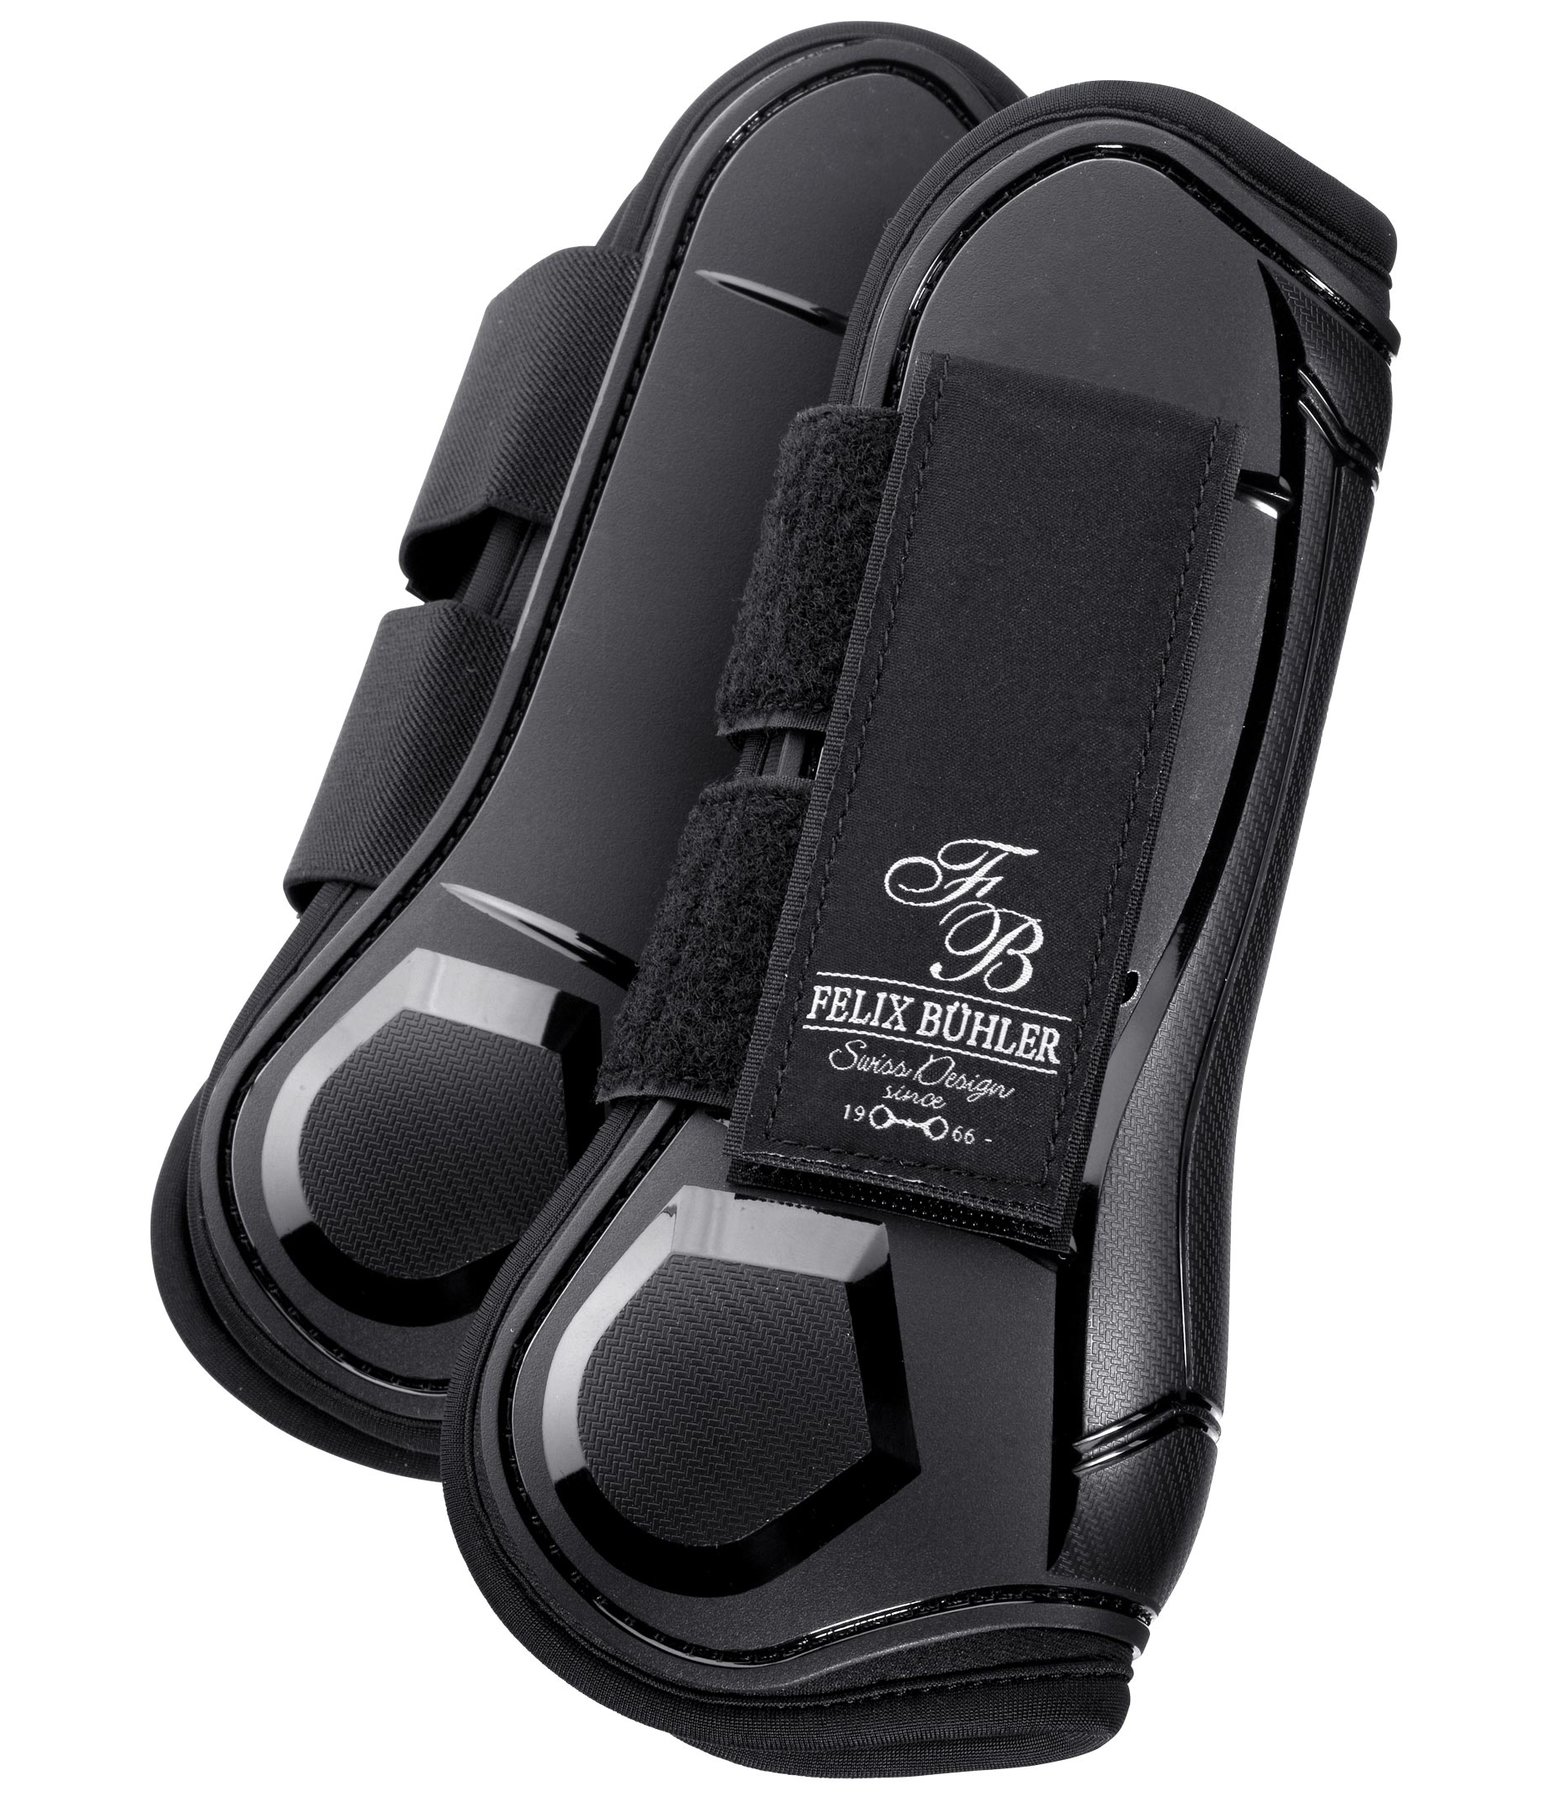 Tendon Boots Breathable Protection